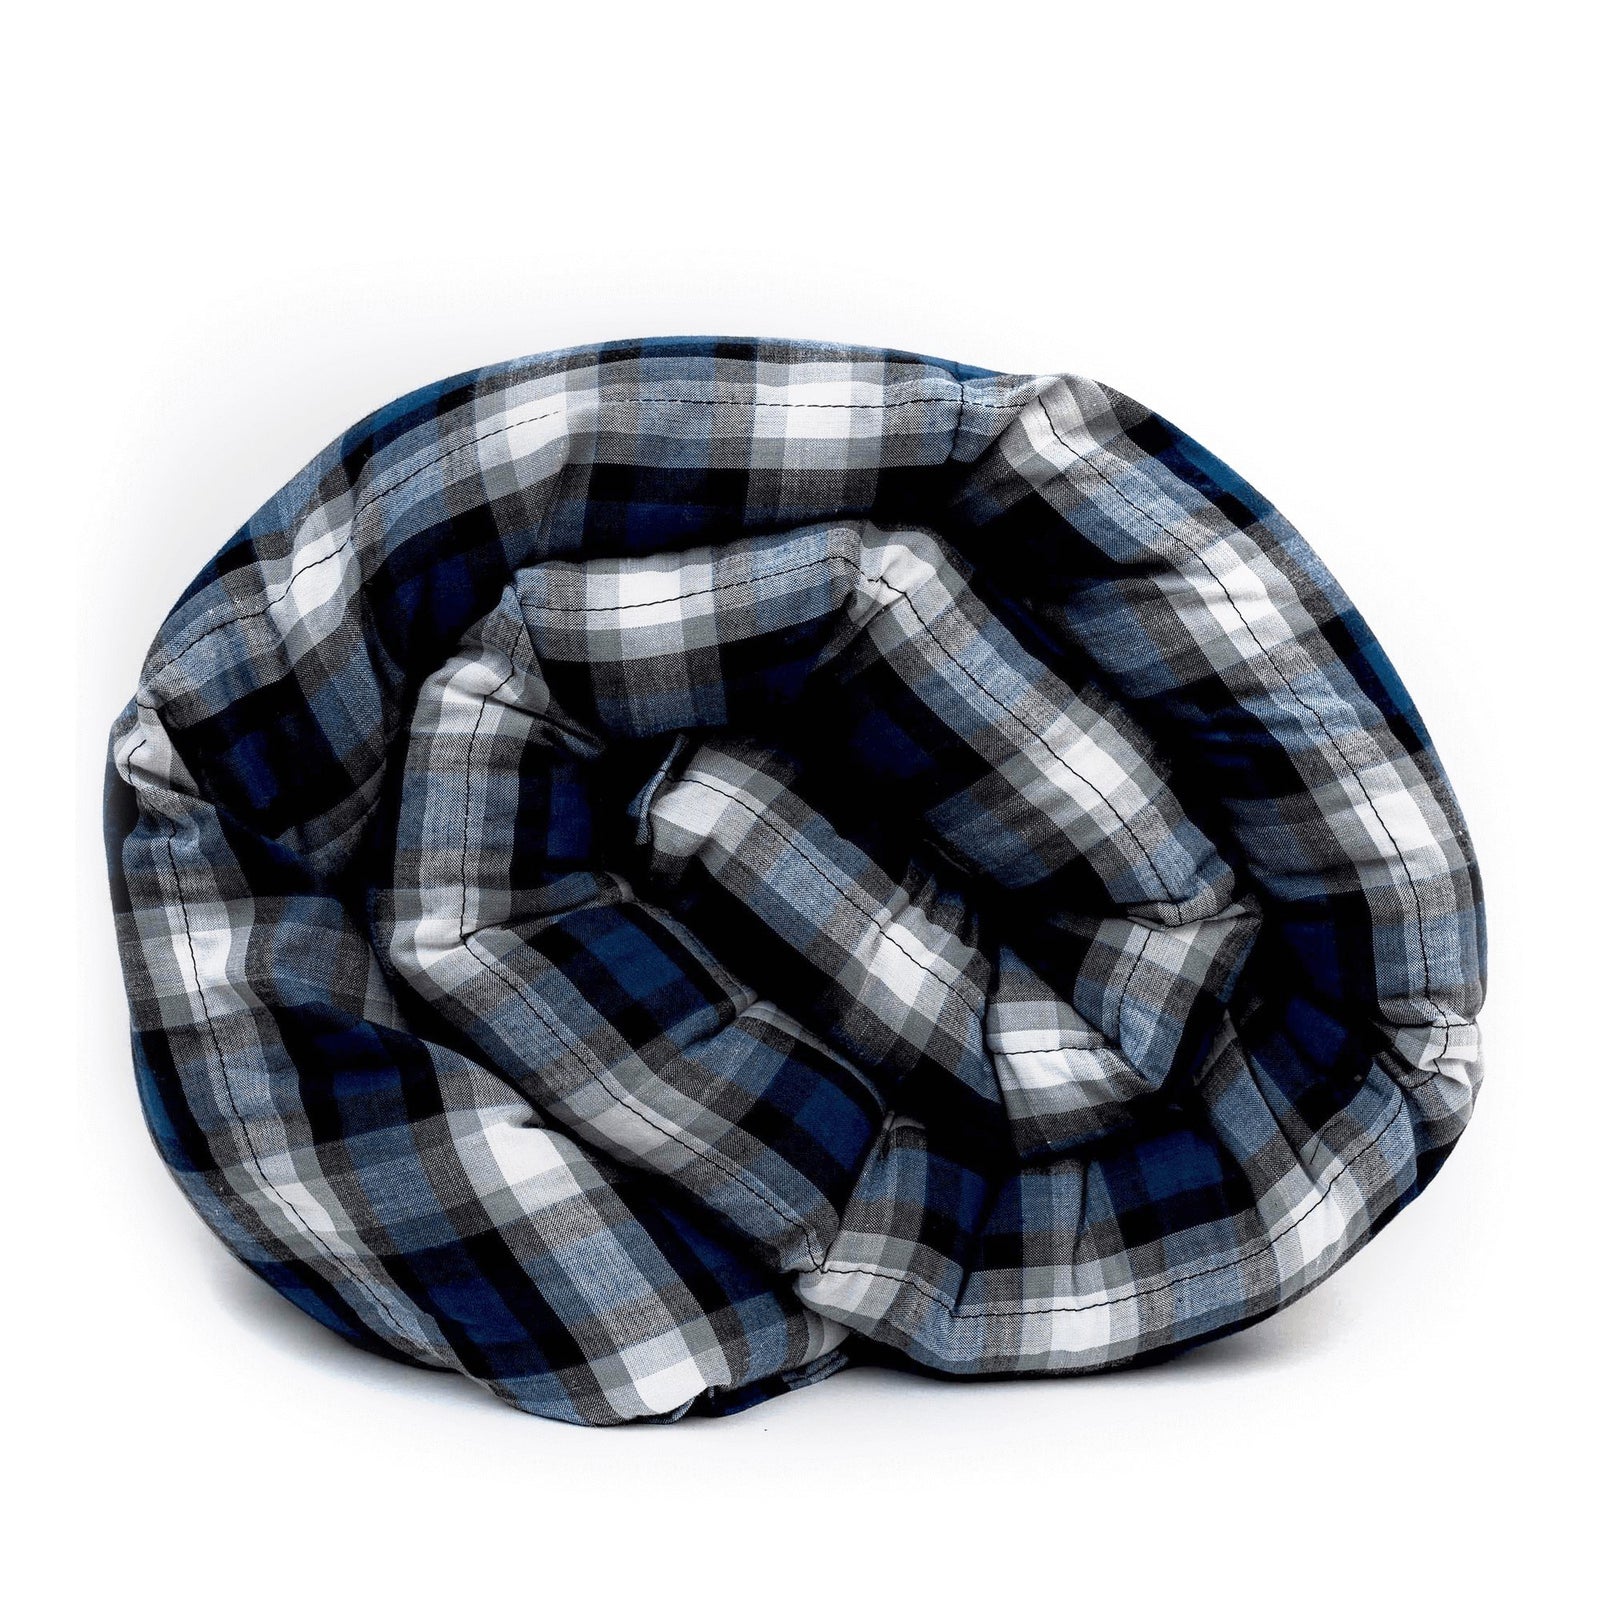 Mosaic Weighted Blankets Kensington Plaid Weighted Blanket